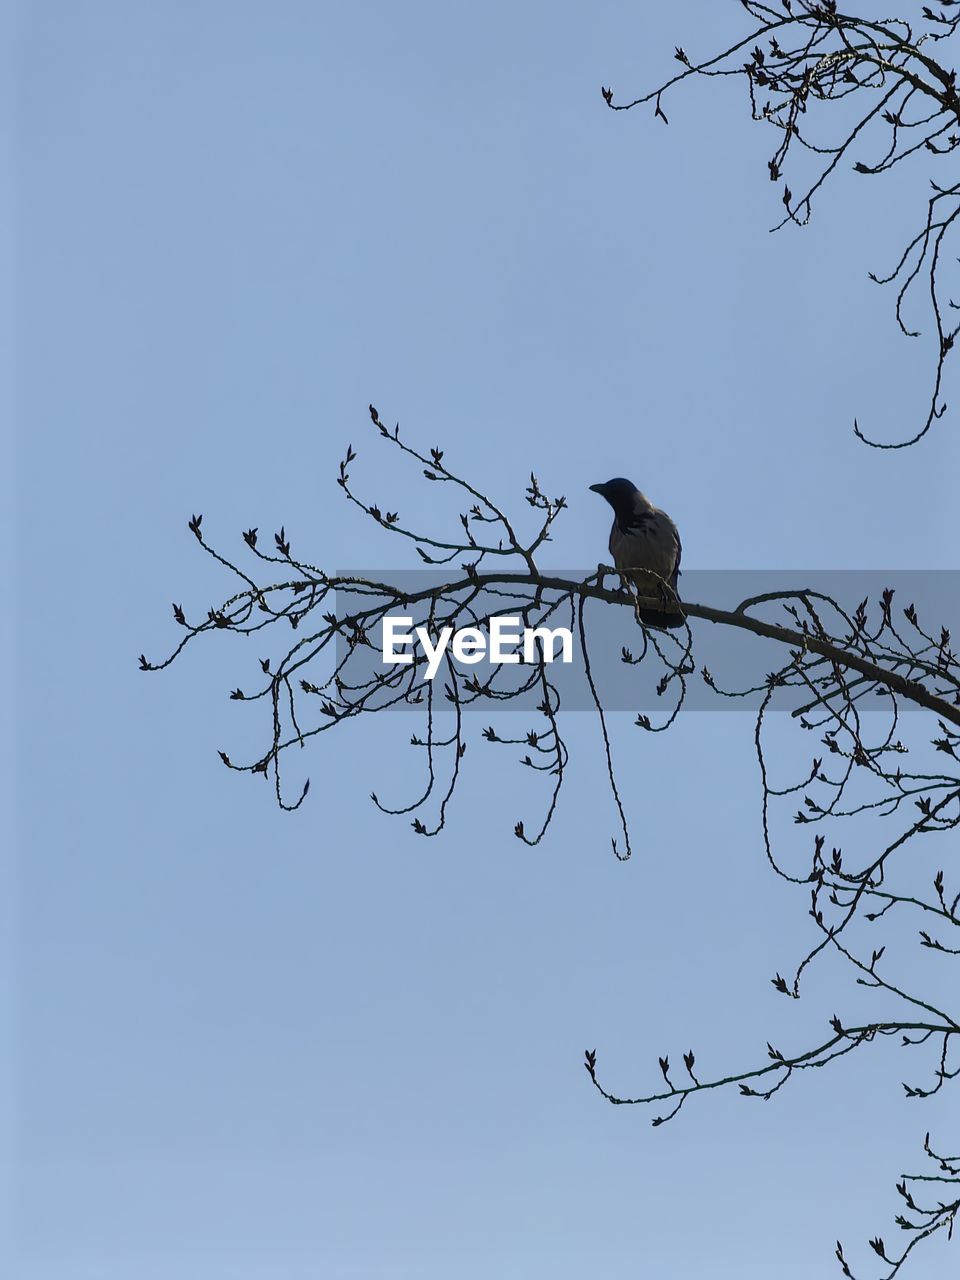 bird, branch, animal, animal wildlife, animal themes, tree, wildlife, sky, nature, perching, bare tree, clear sky, no people, twig, plant, group of animals, crow, blue, silhouette, low angle view, outdoors, bird of prey, beauty in nature, animal migration, flock, flower